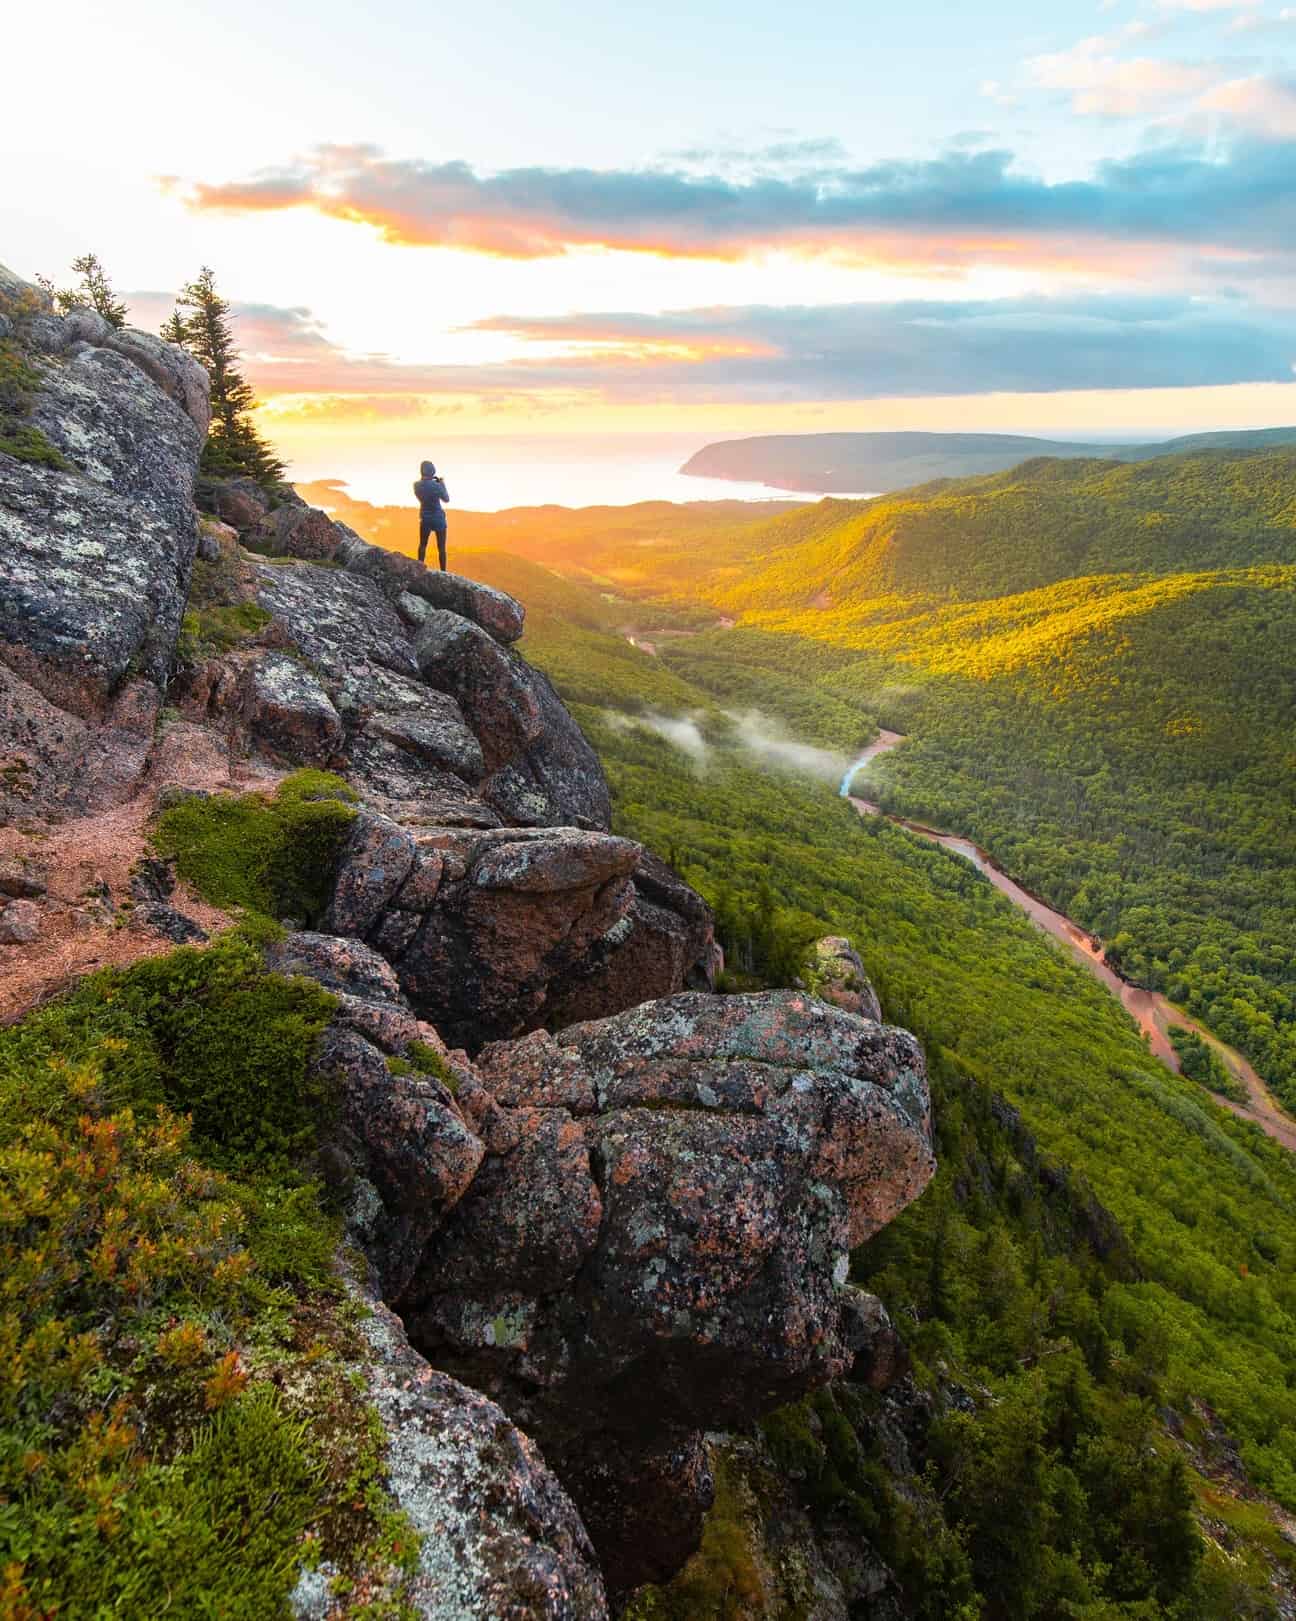 Female hikers on the Franny Trail in Cape Breton Highlands National Park